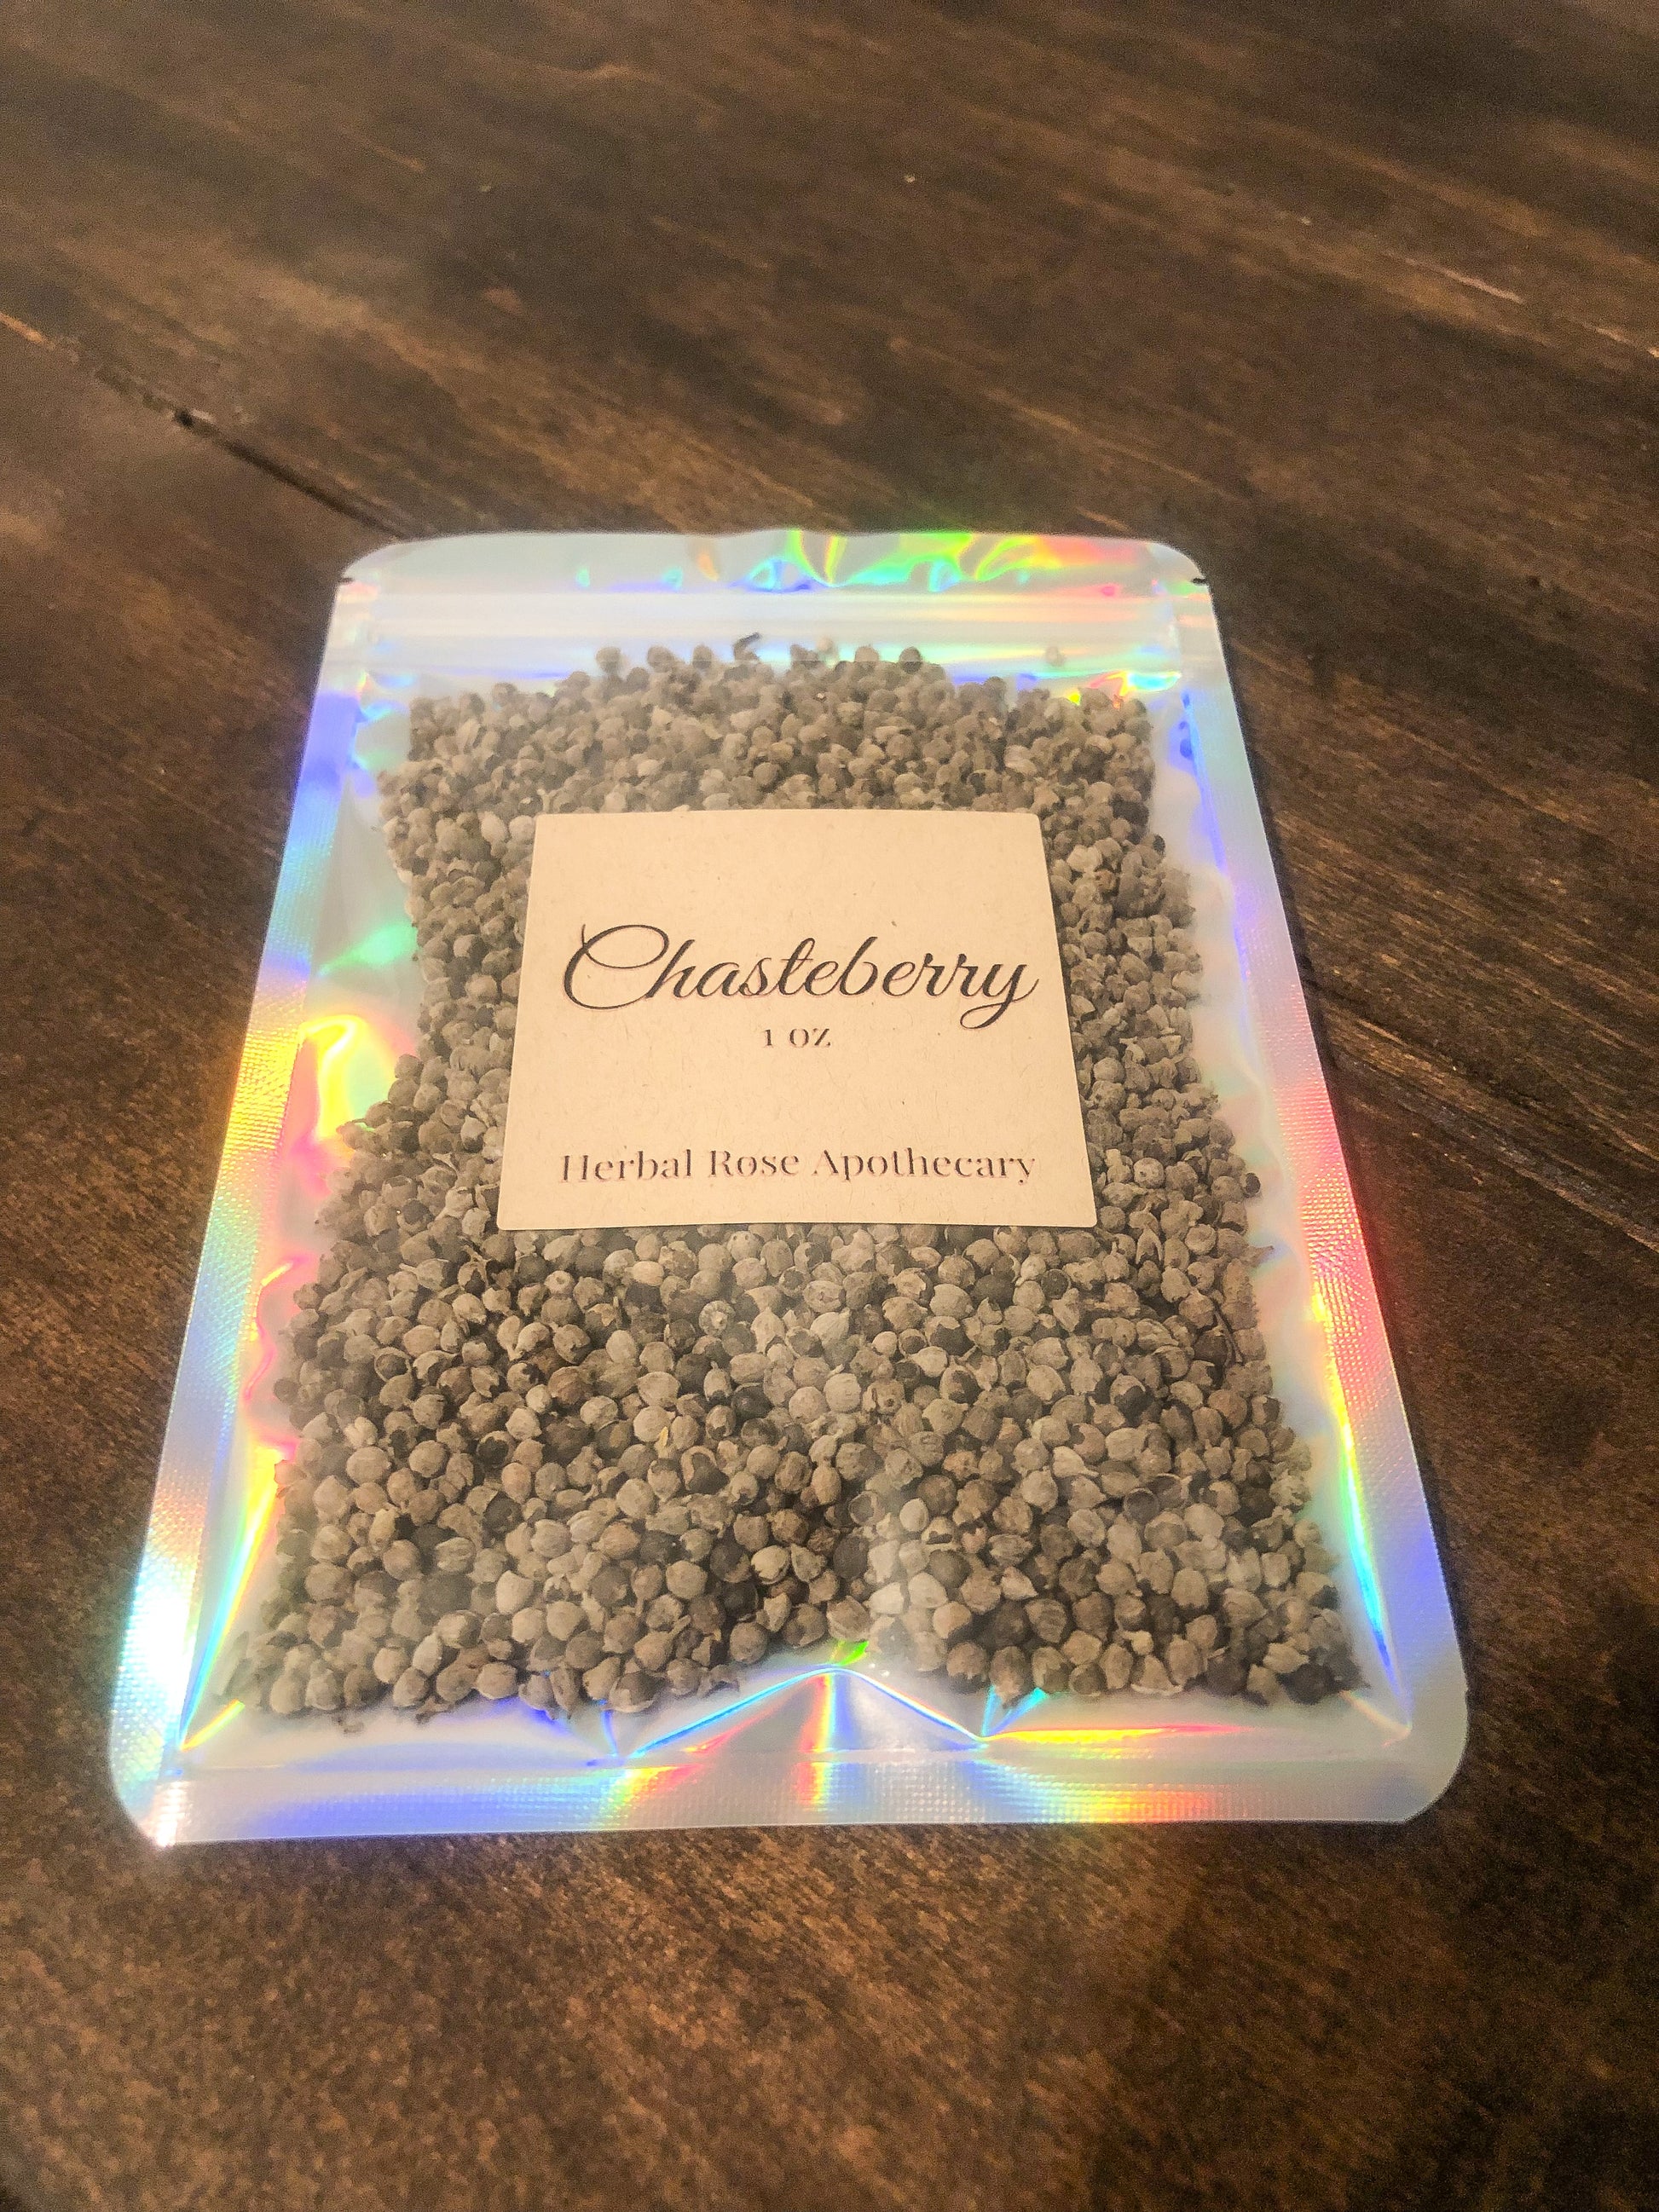 chasteberry 1oz in clear bag on wooden background